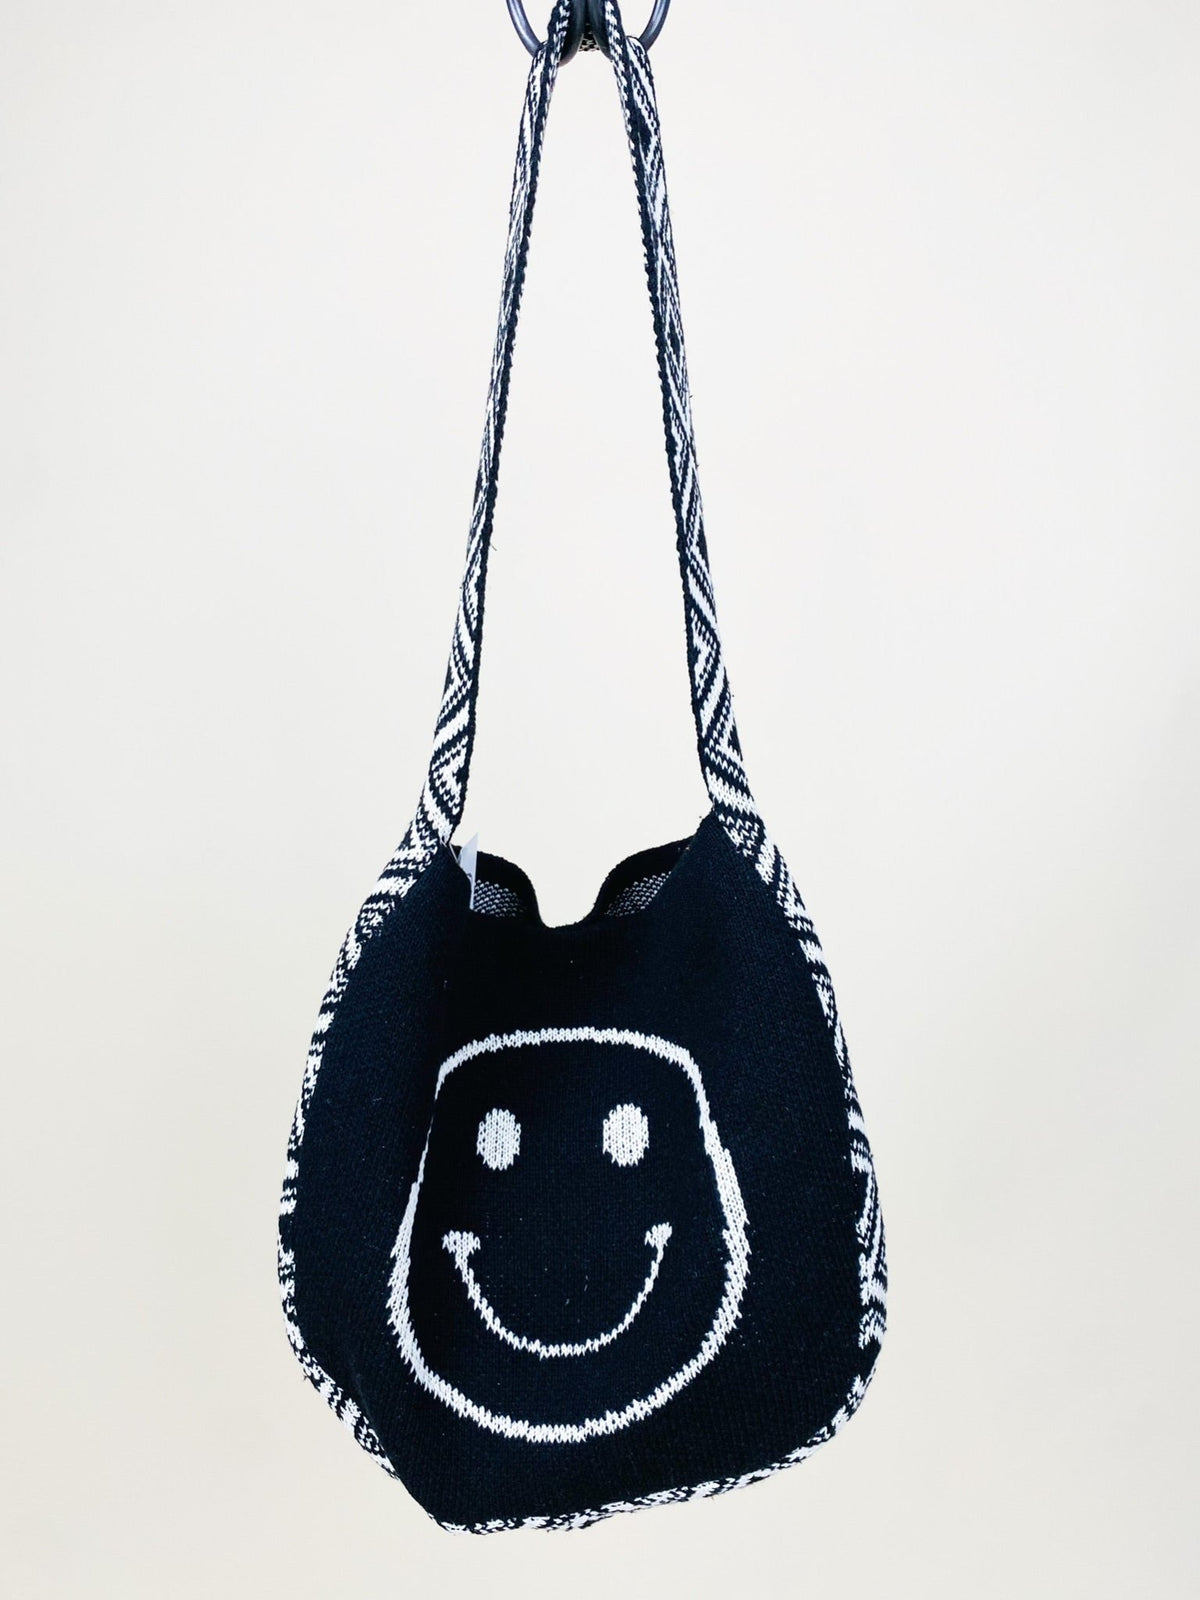 Smiley face geo woven bag black - Stylish bag - Trendy Summer Lake T-Shirts and Tank Tops at Lush Fashion Lounge Boutique in Oklahoma City